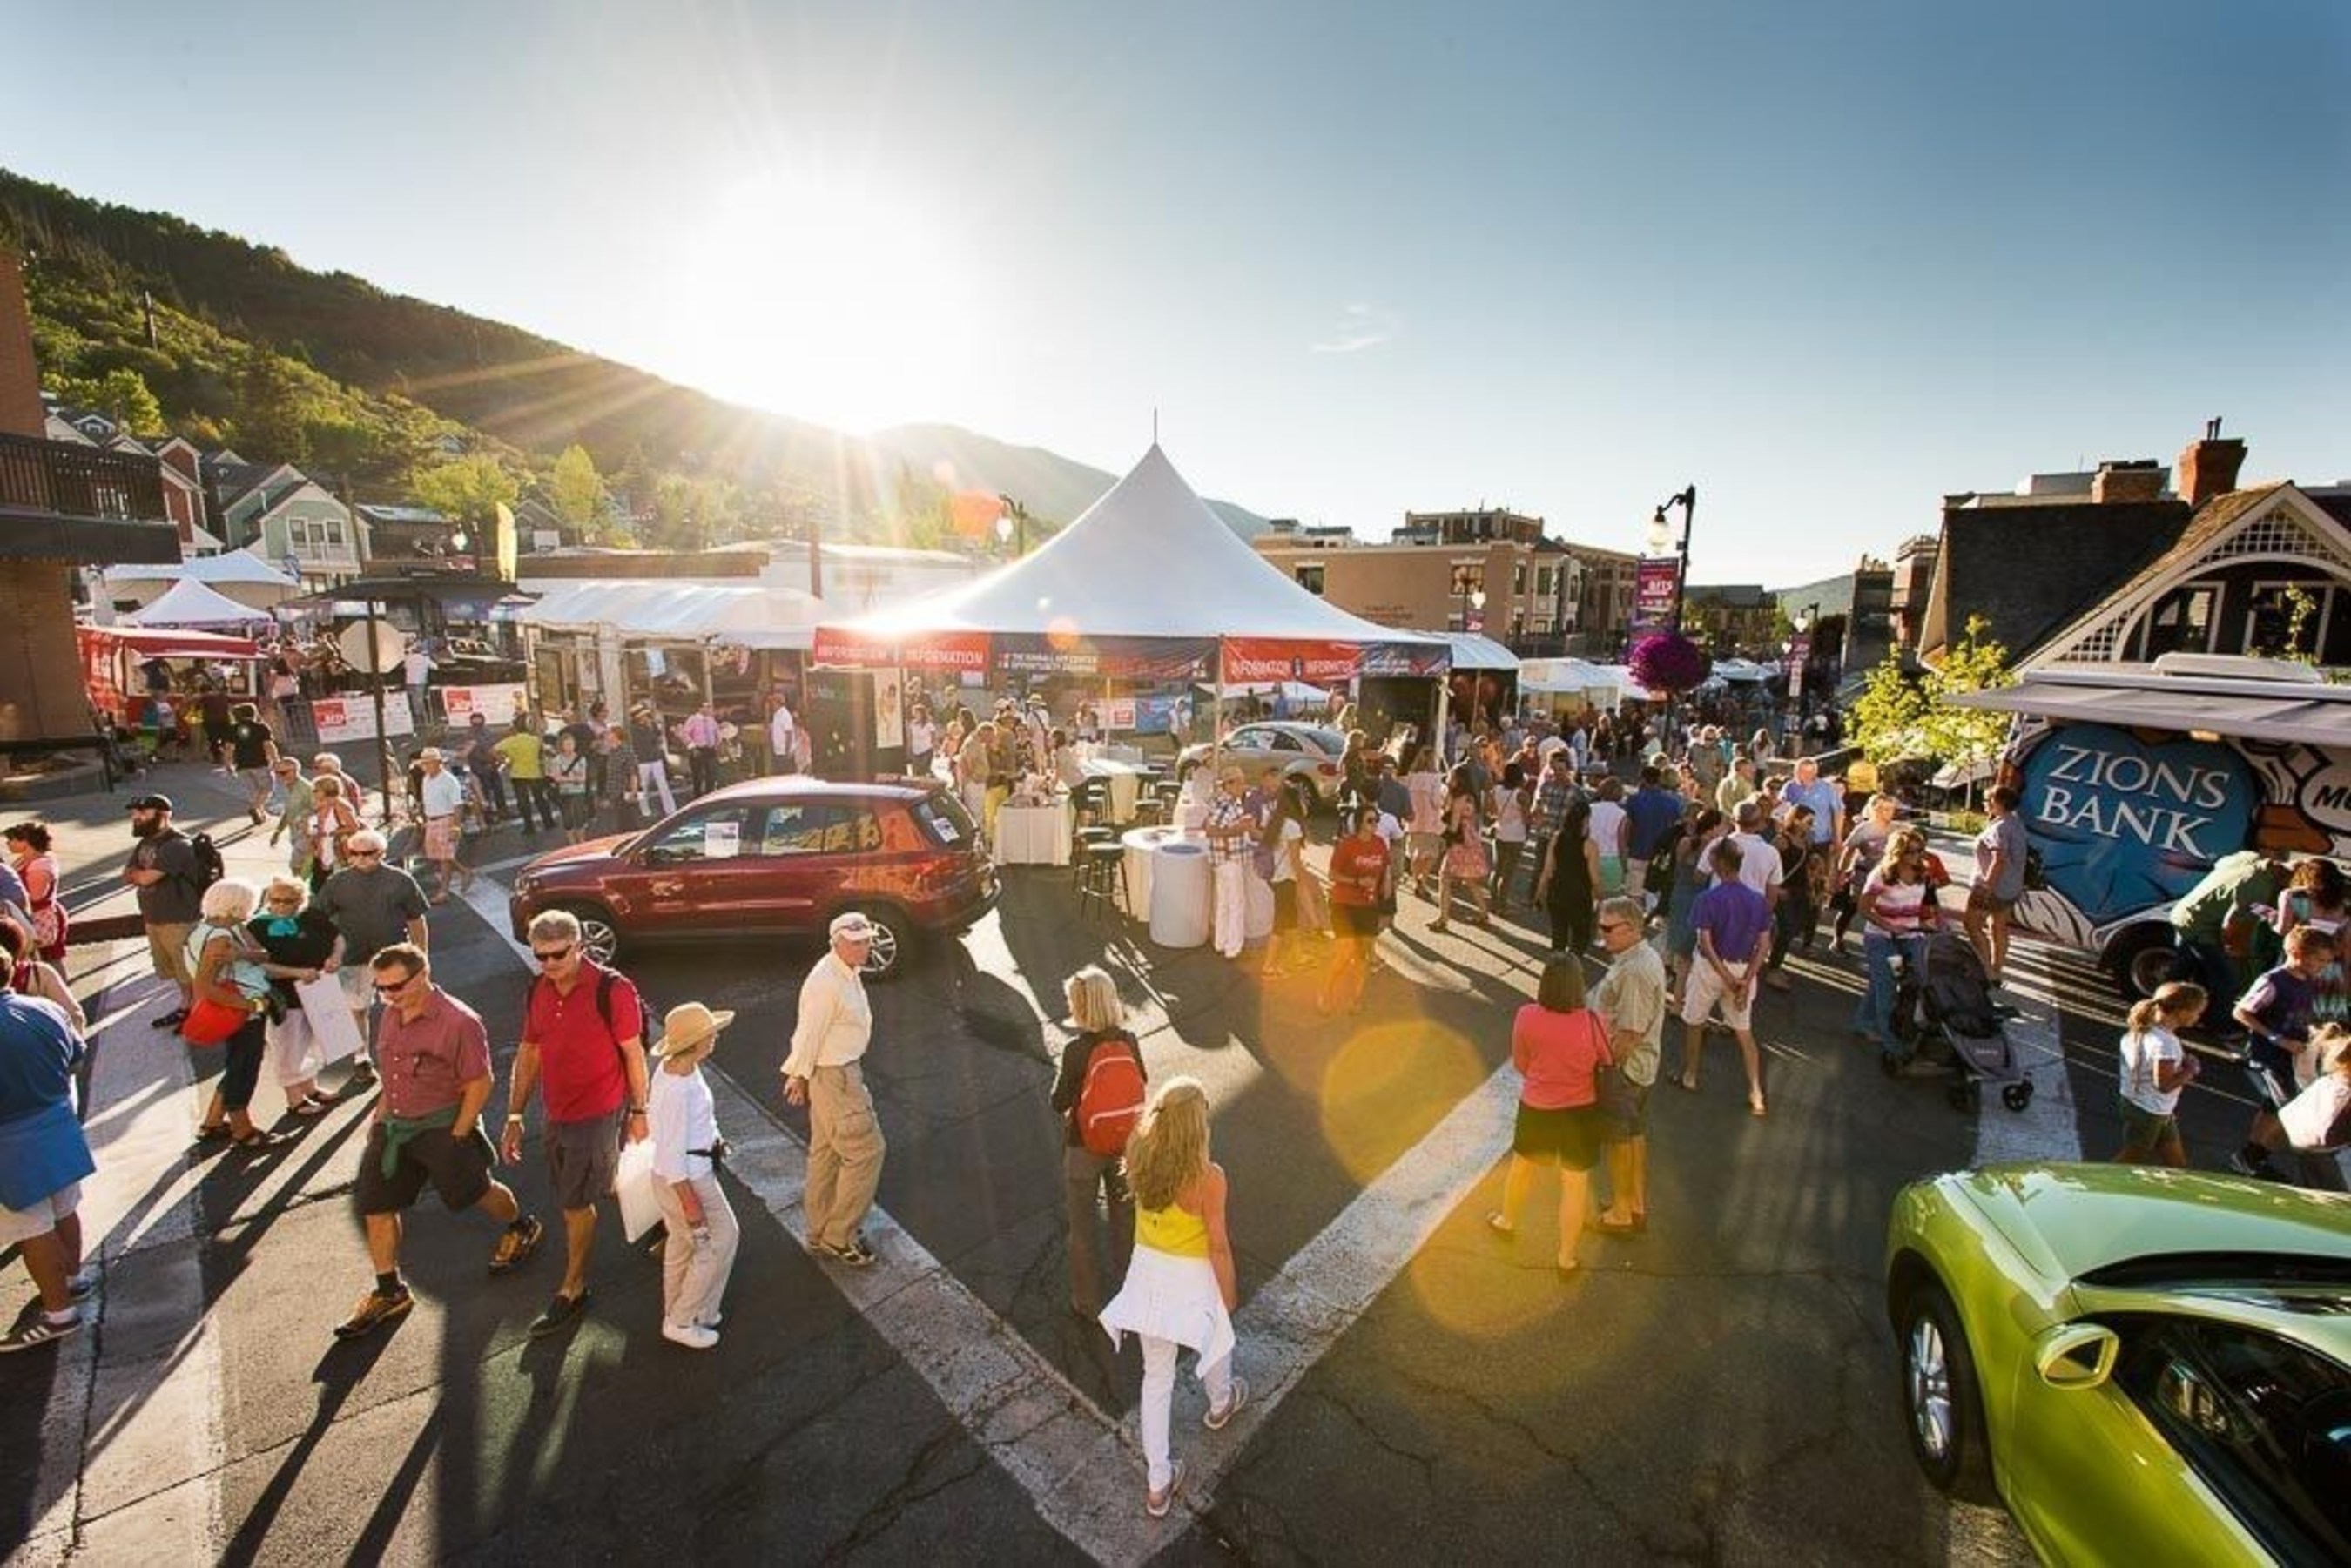 Park City Kimball Arts Festival celebrates 47 years. Over 200 juried artists, 3 stages of live music, food truck roundup, kid's activities, and cool mountain breezes.